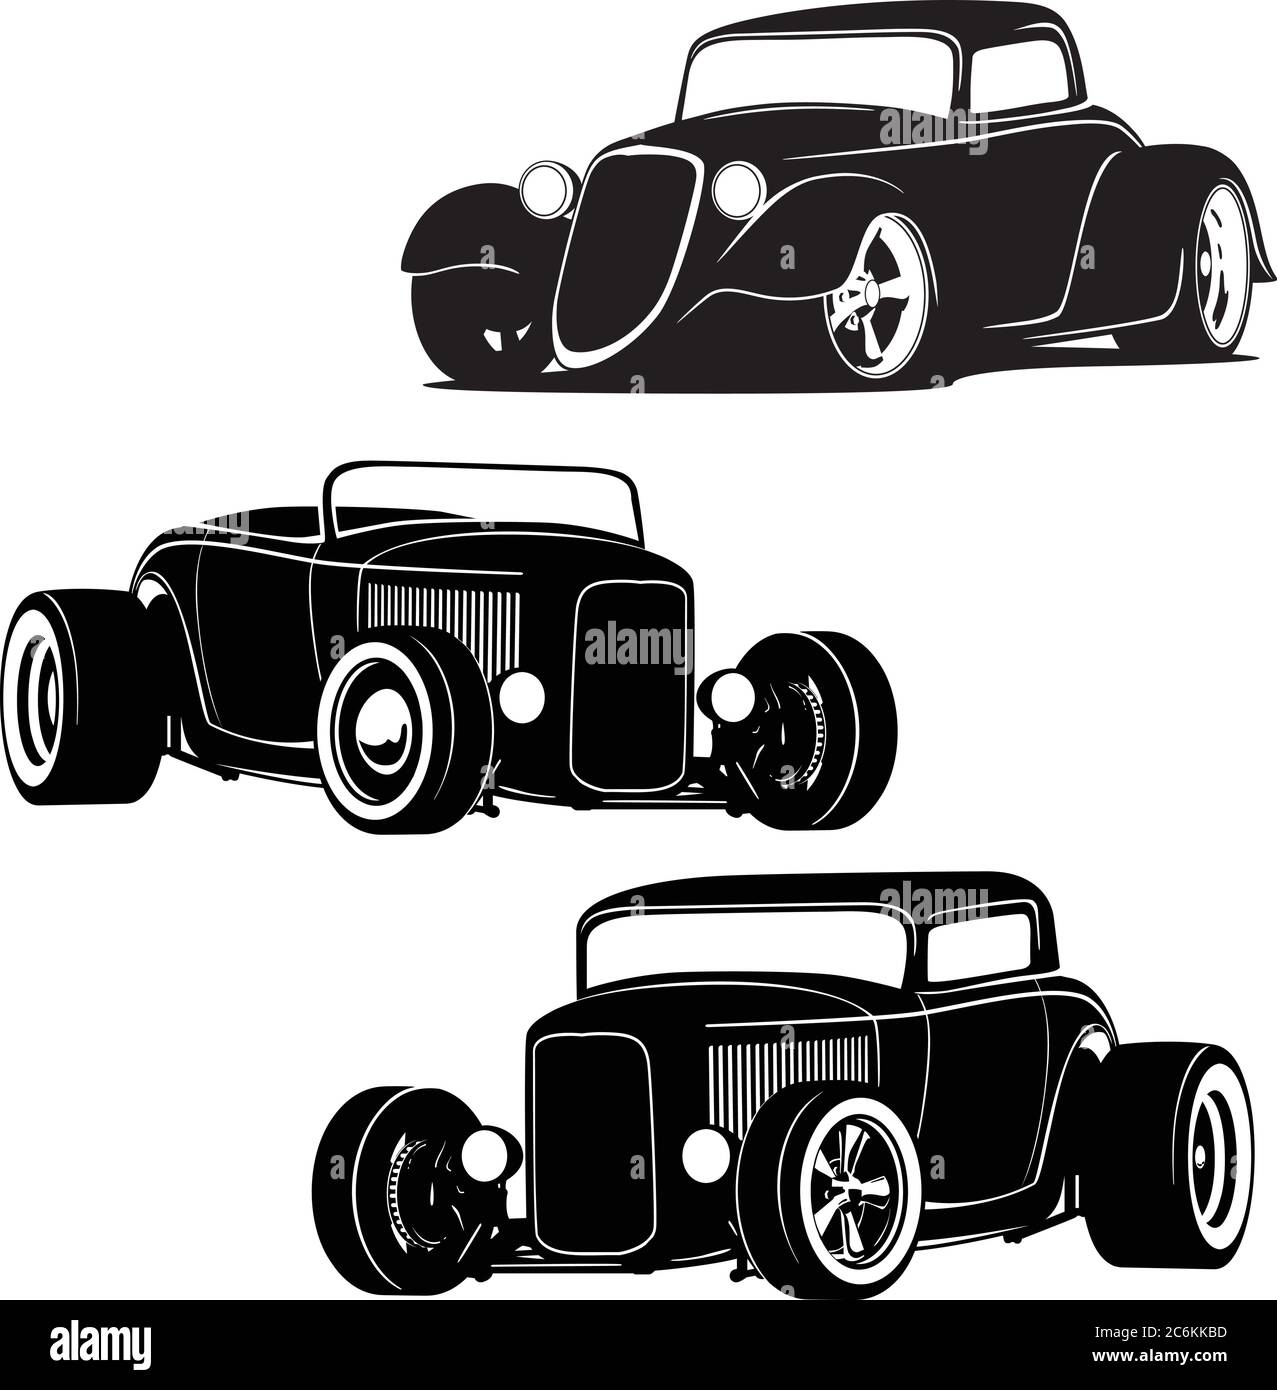 Hot Rod Muscle Cars Silhouette Set Illustrazione vettoriale isolata Illustrazione Vettoriale